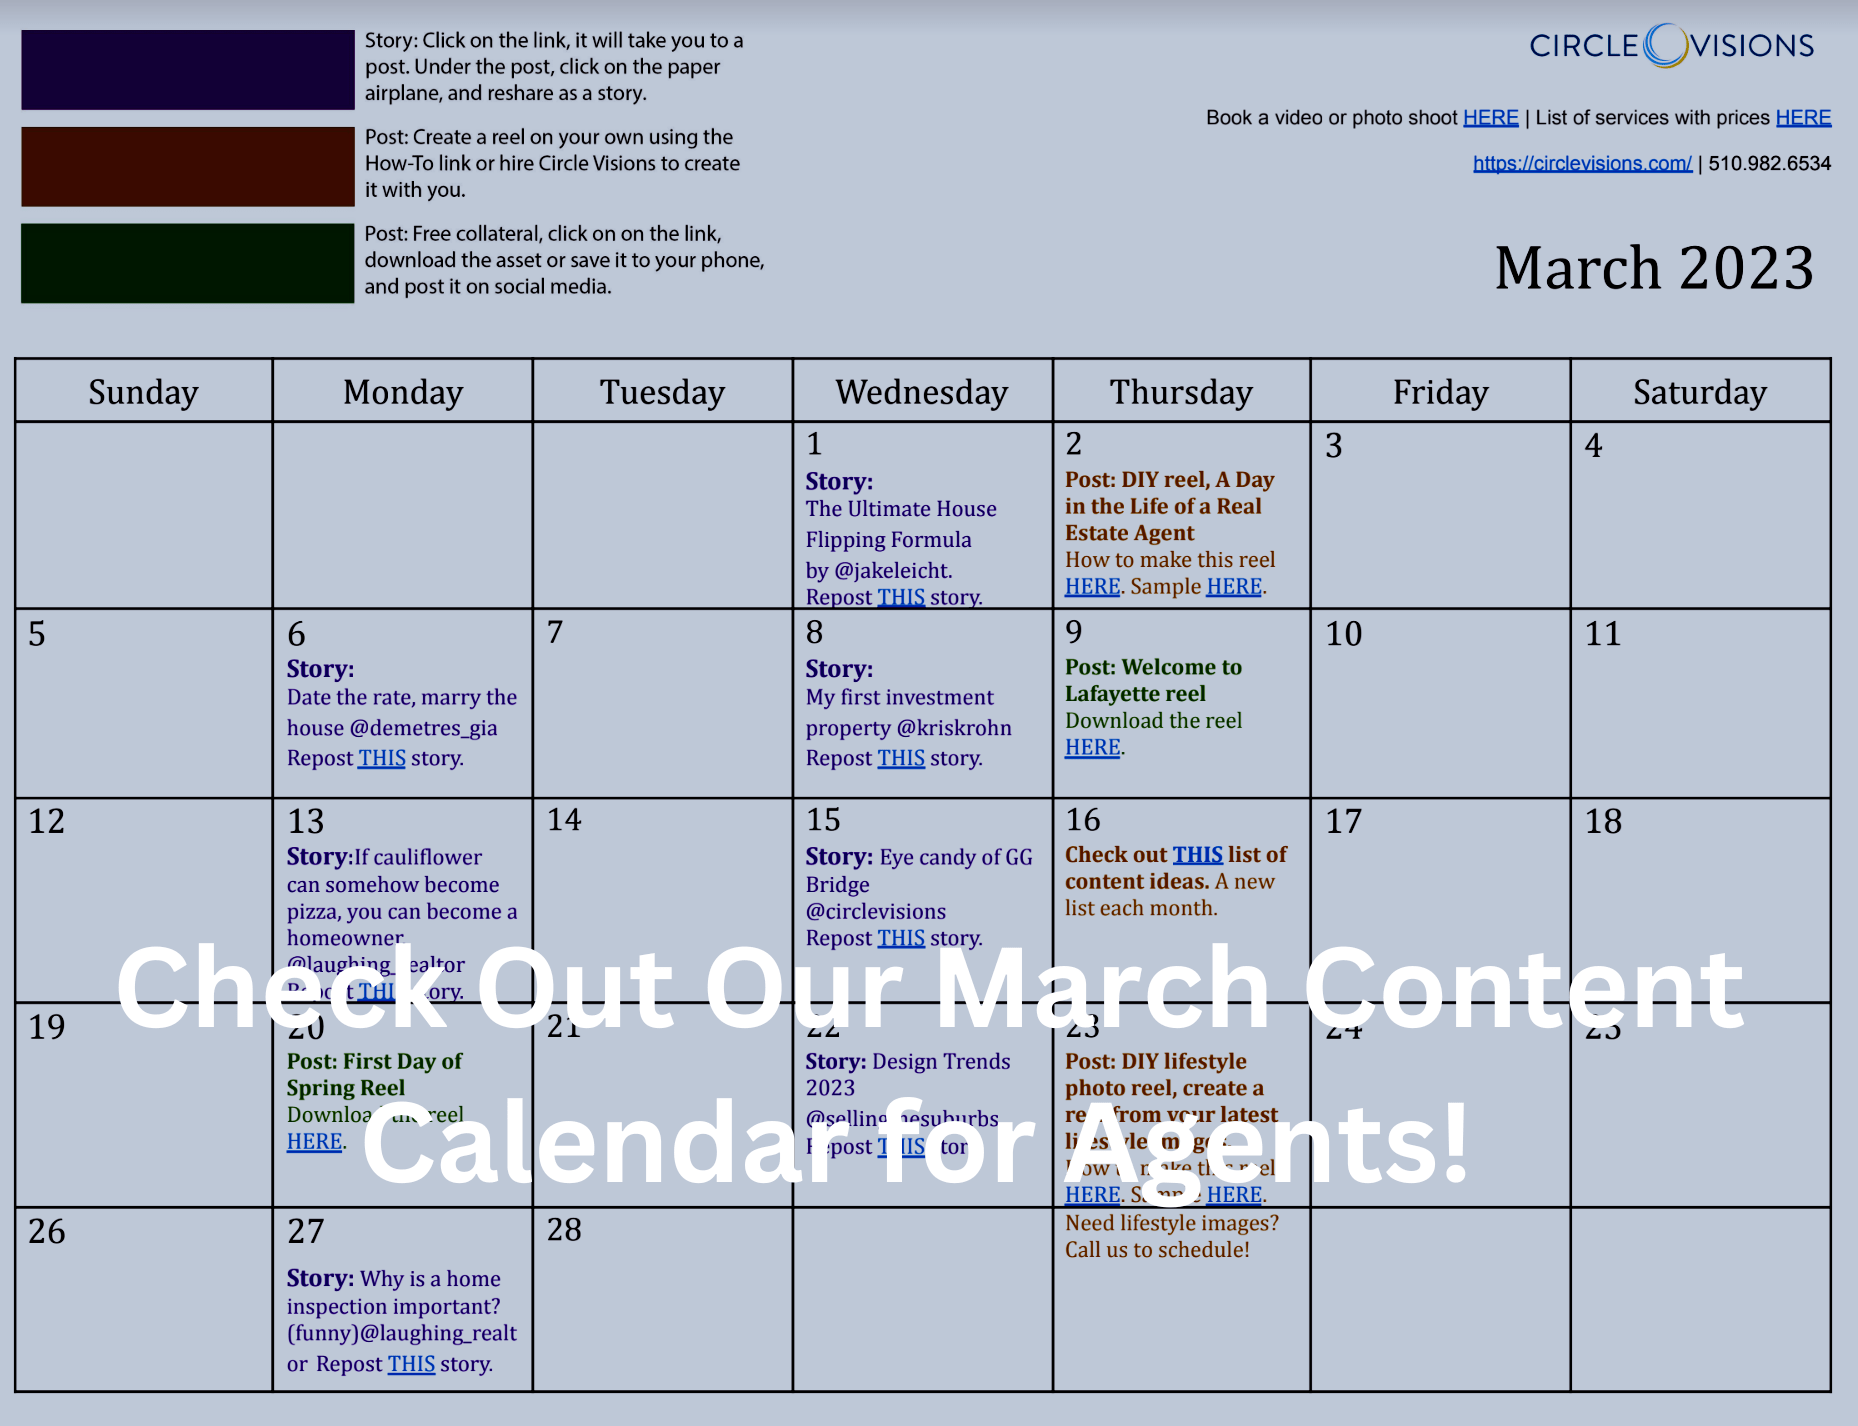 Check Out Our March Content Calendar for Agents!